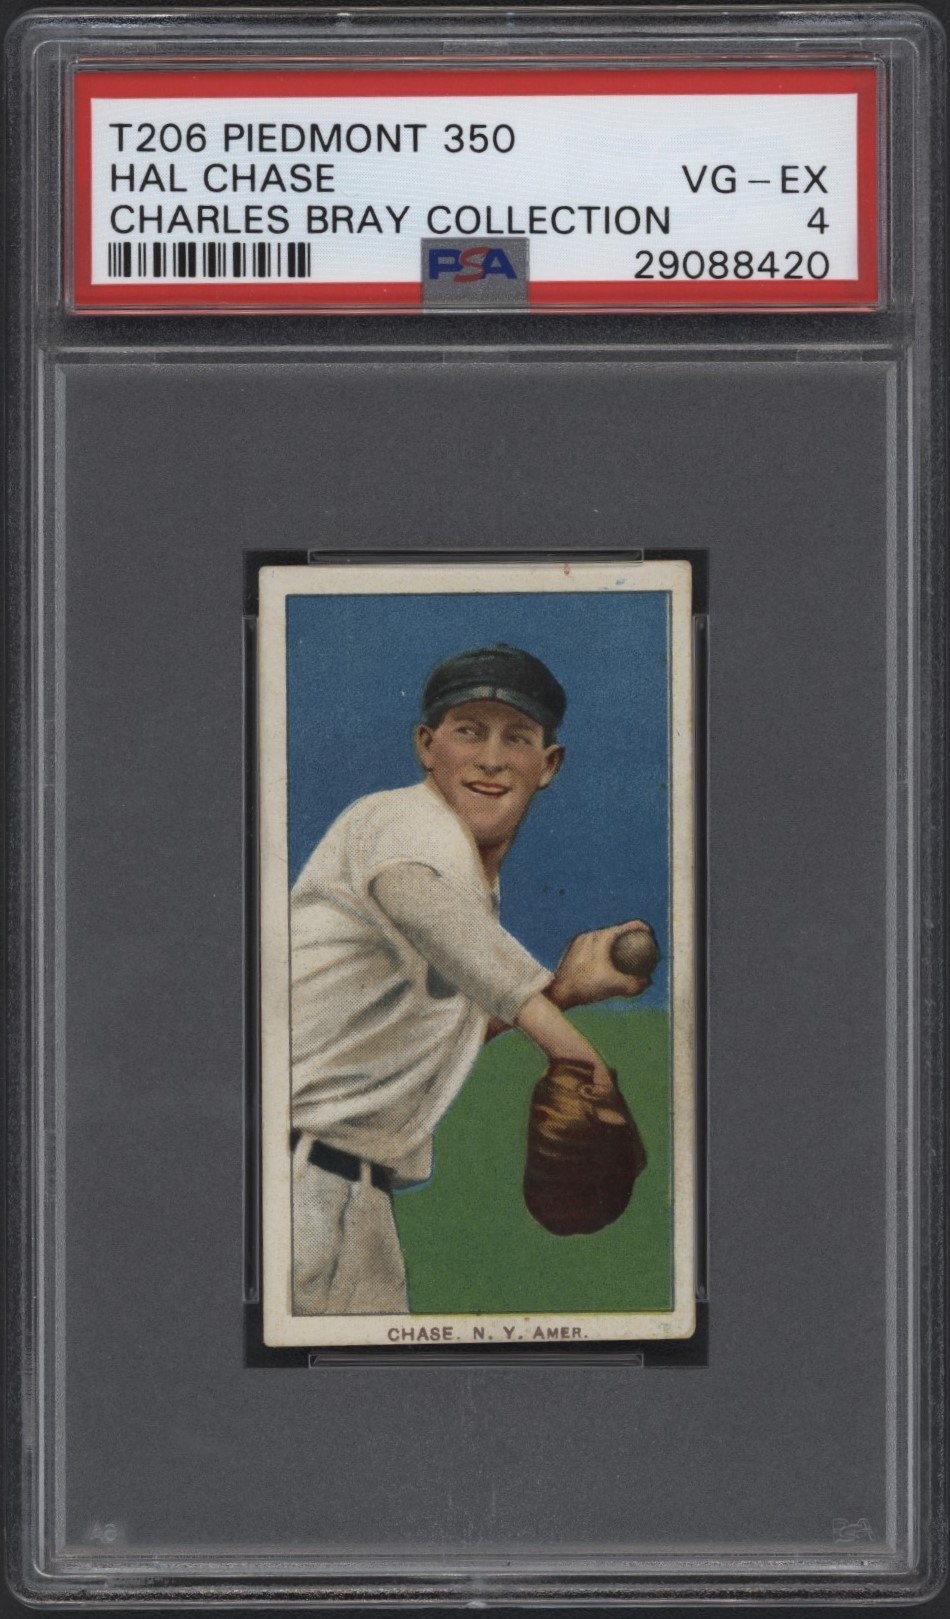 T206 Piedmont 350 Hal Chase PSA VG-EX 4 From the Charles Bray Collection.